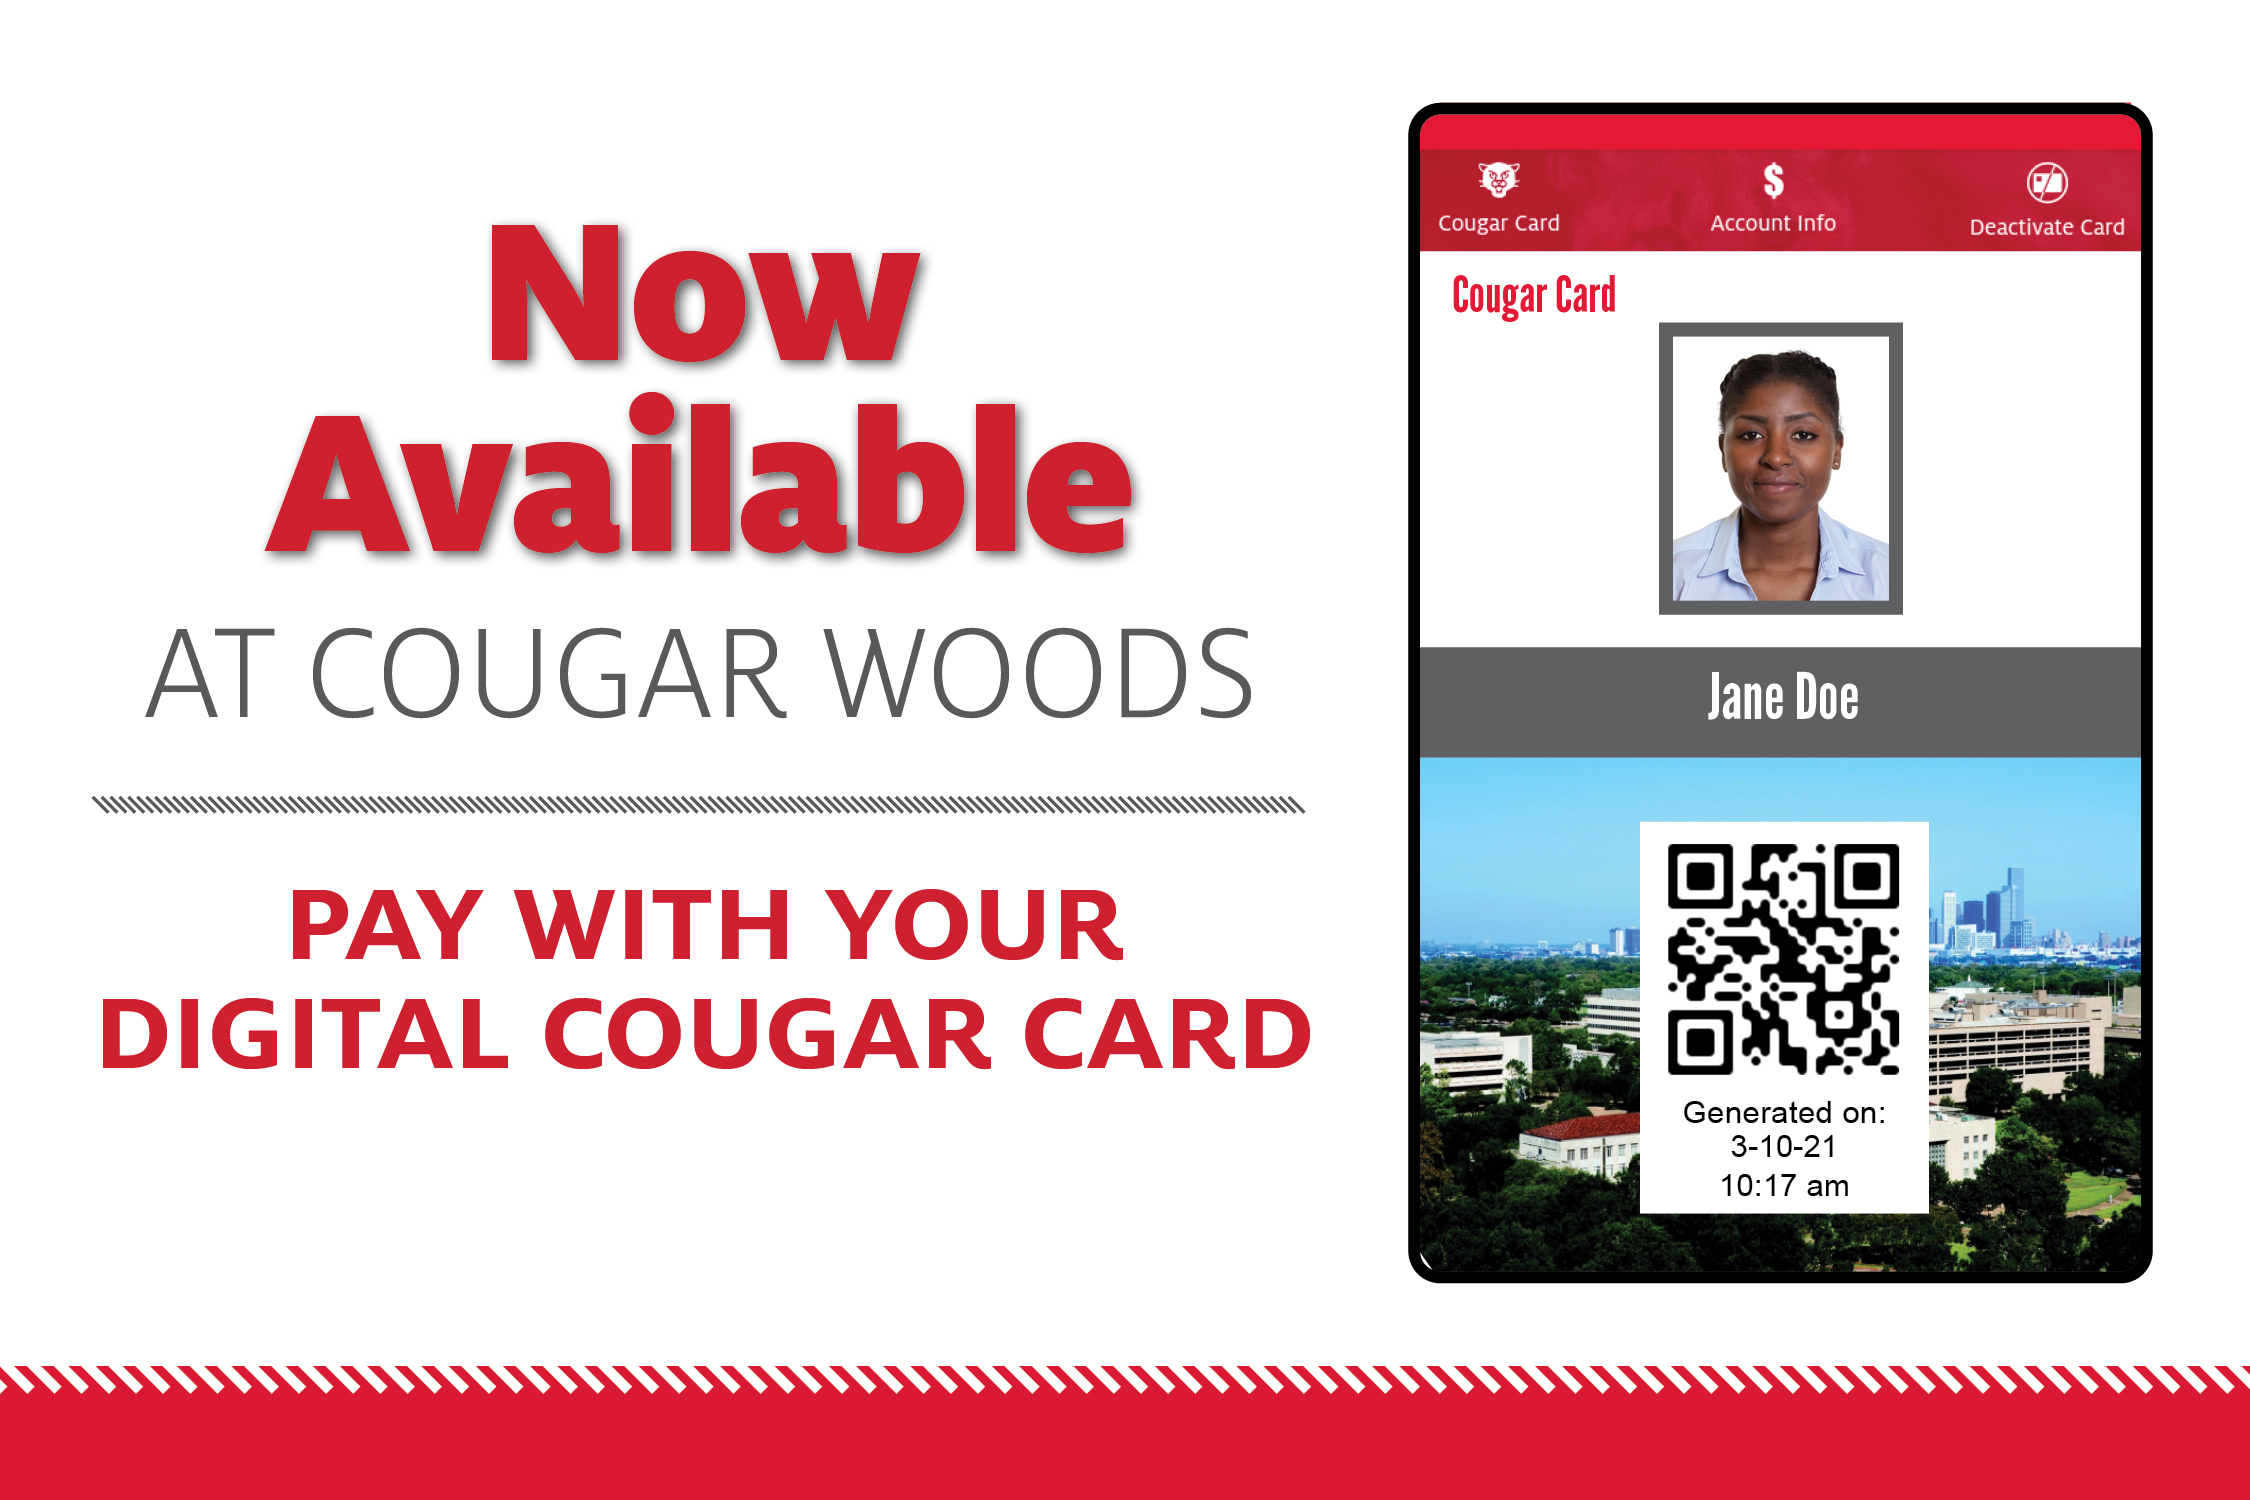 Pay With Your Digital Cougar Card